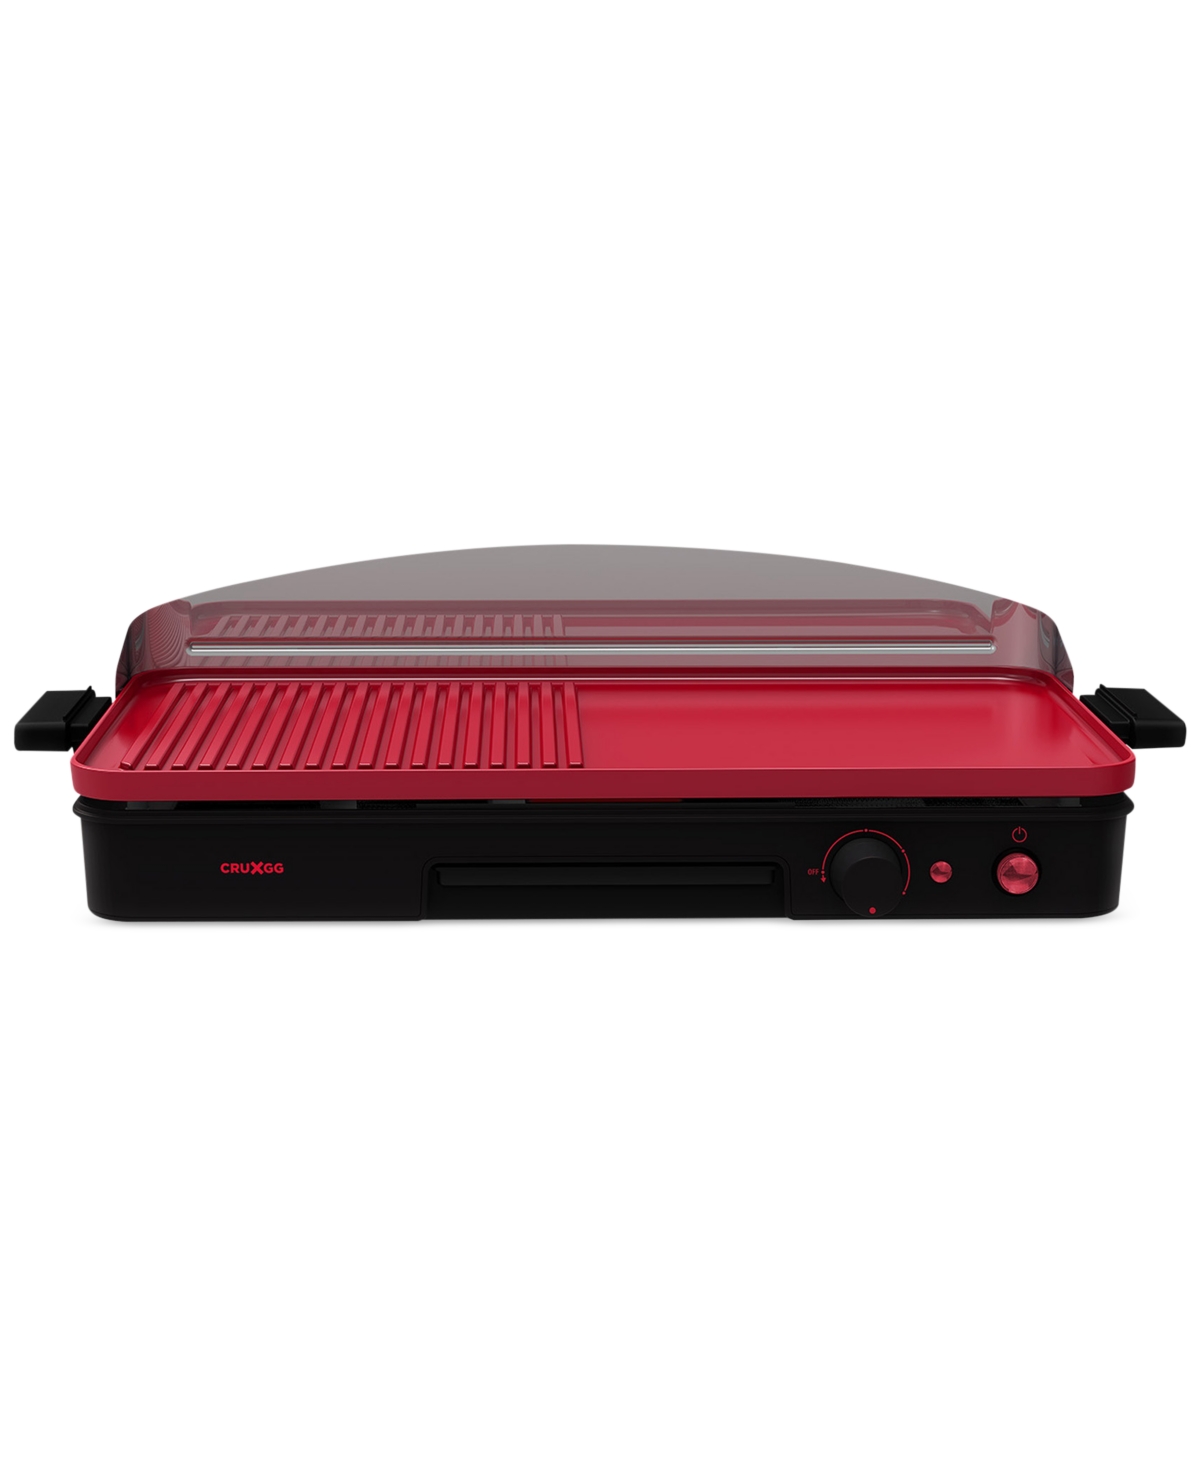 Crux Gg Nonstick Searing Countertop Grill & Griddle In Black